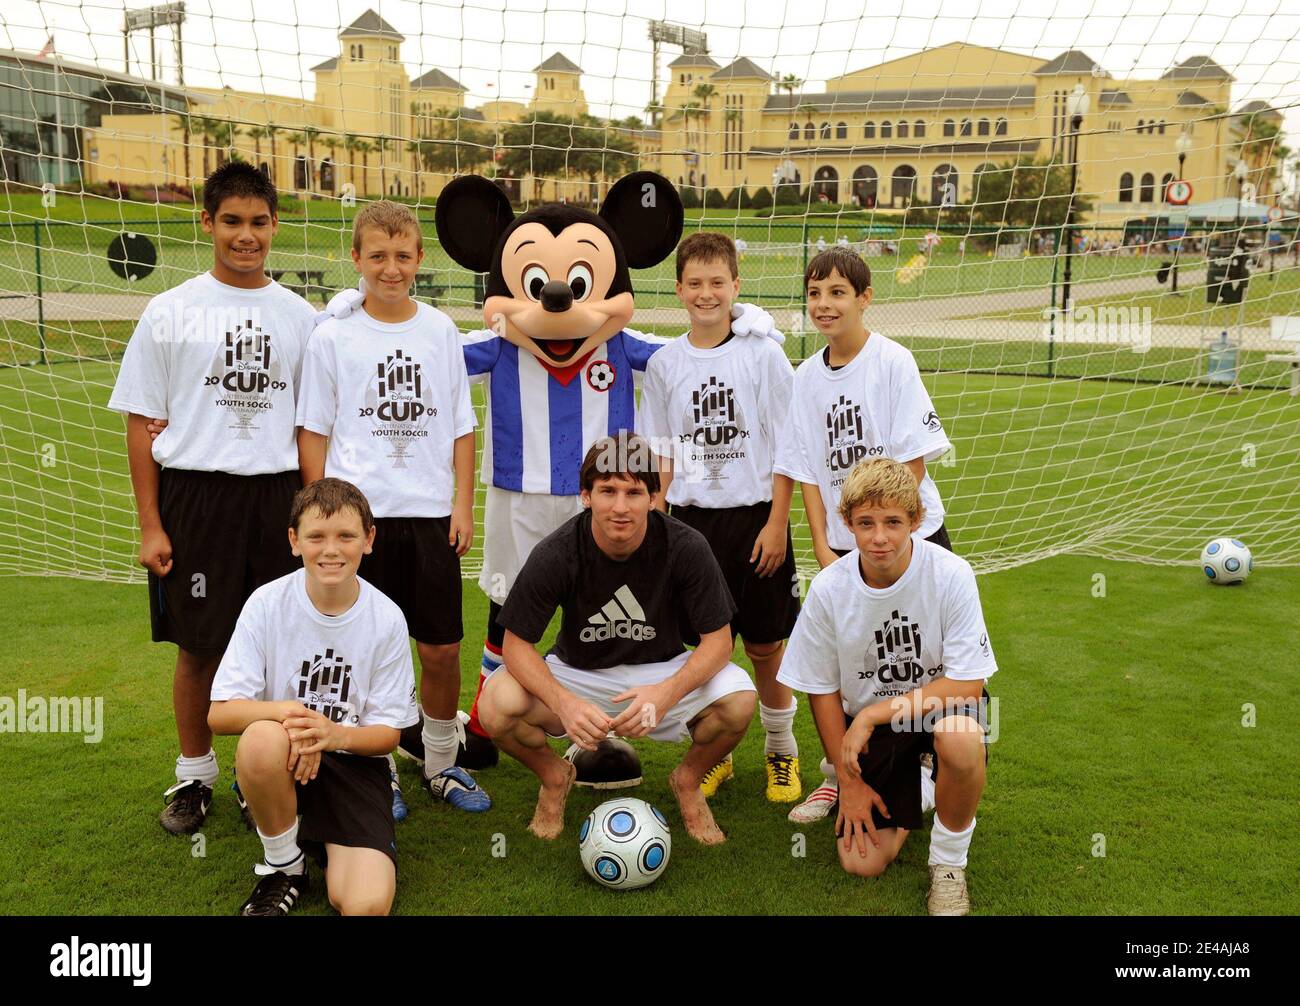 Argentina and FC Barcelona's soccer player Lionel Messi poses with Orlando-area youth soccer players and Mickey Mouse during his vacation at Disney's Wide World of Sports Complex in Kissimmee, Florida, USA on July 9, 2009. Photo by Kent Phillips/Cameleon/ABACAPRESS.COM Stock Photo